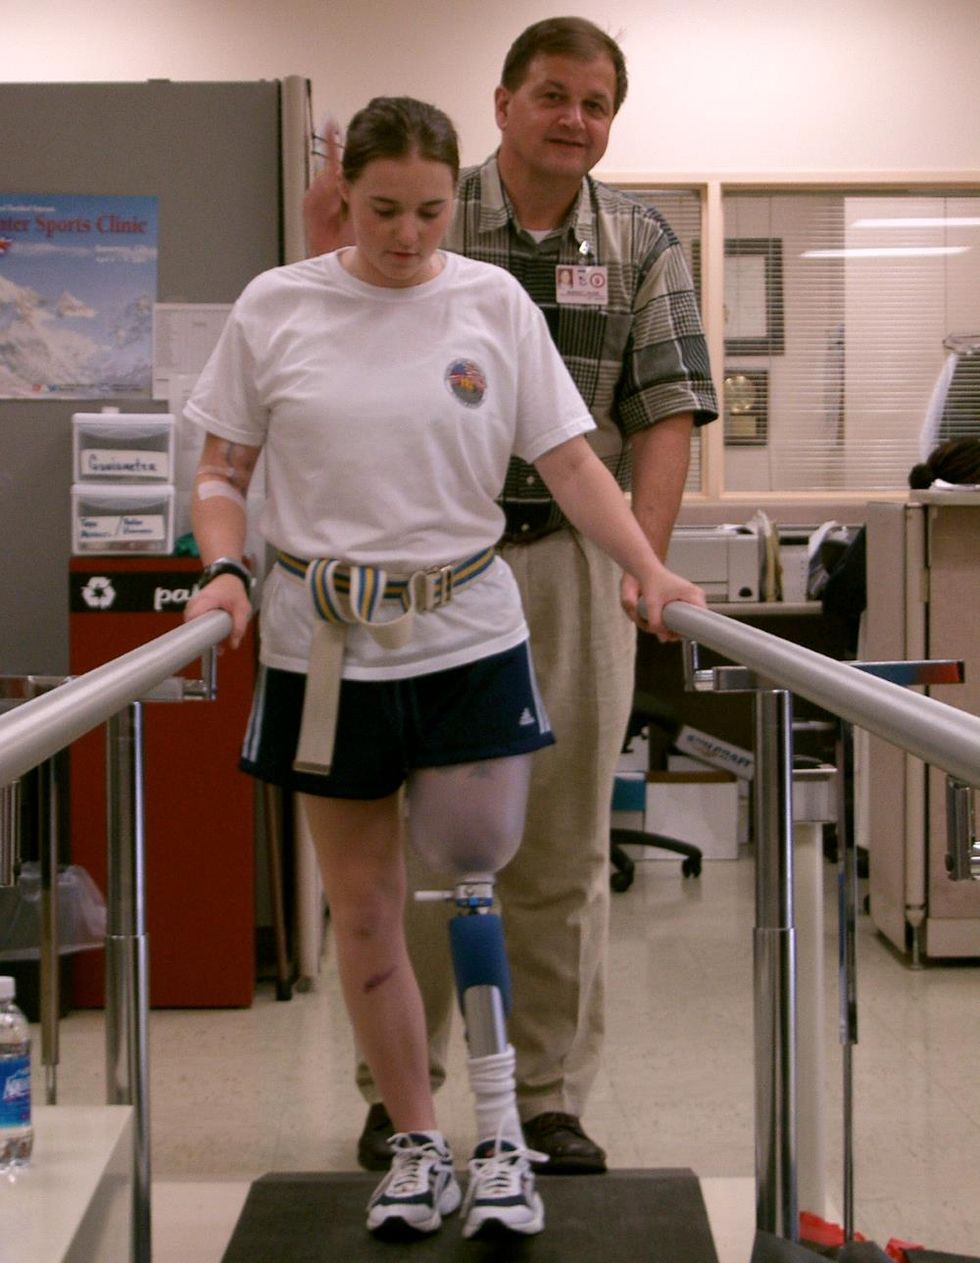 Learning to walk with prosthetic leg